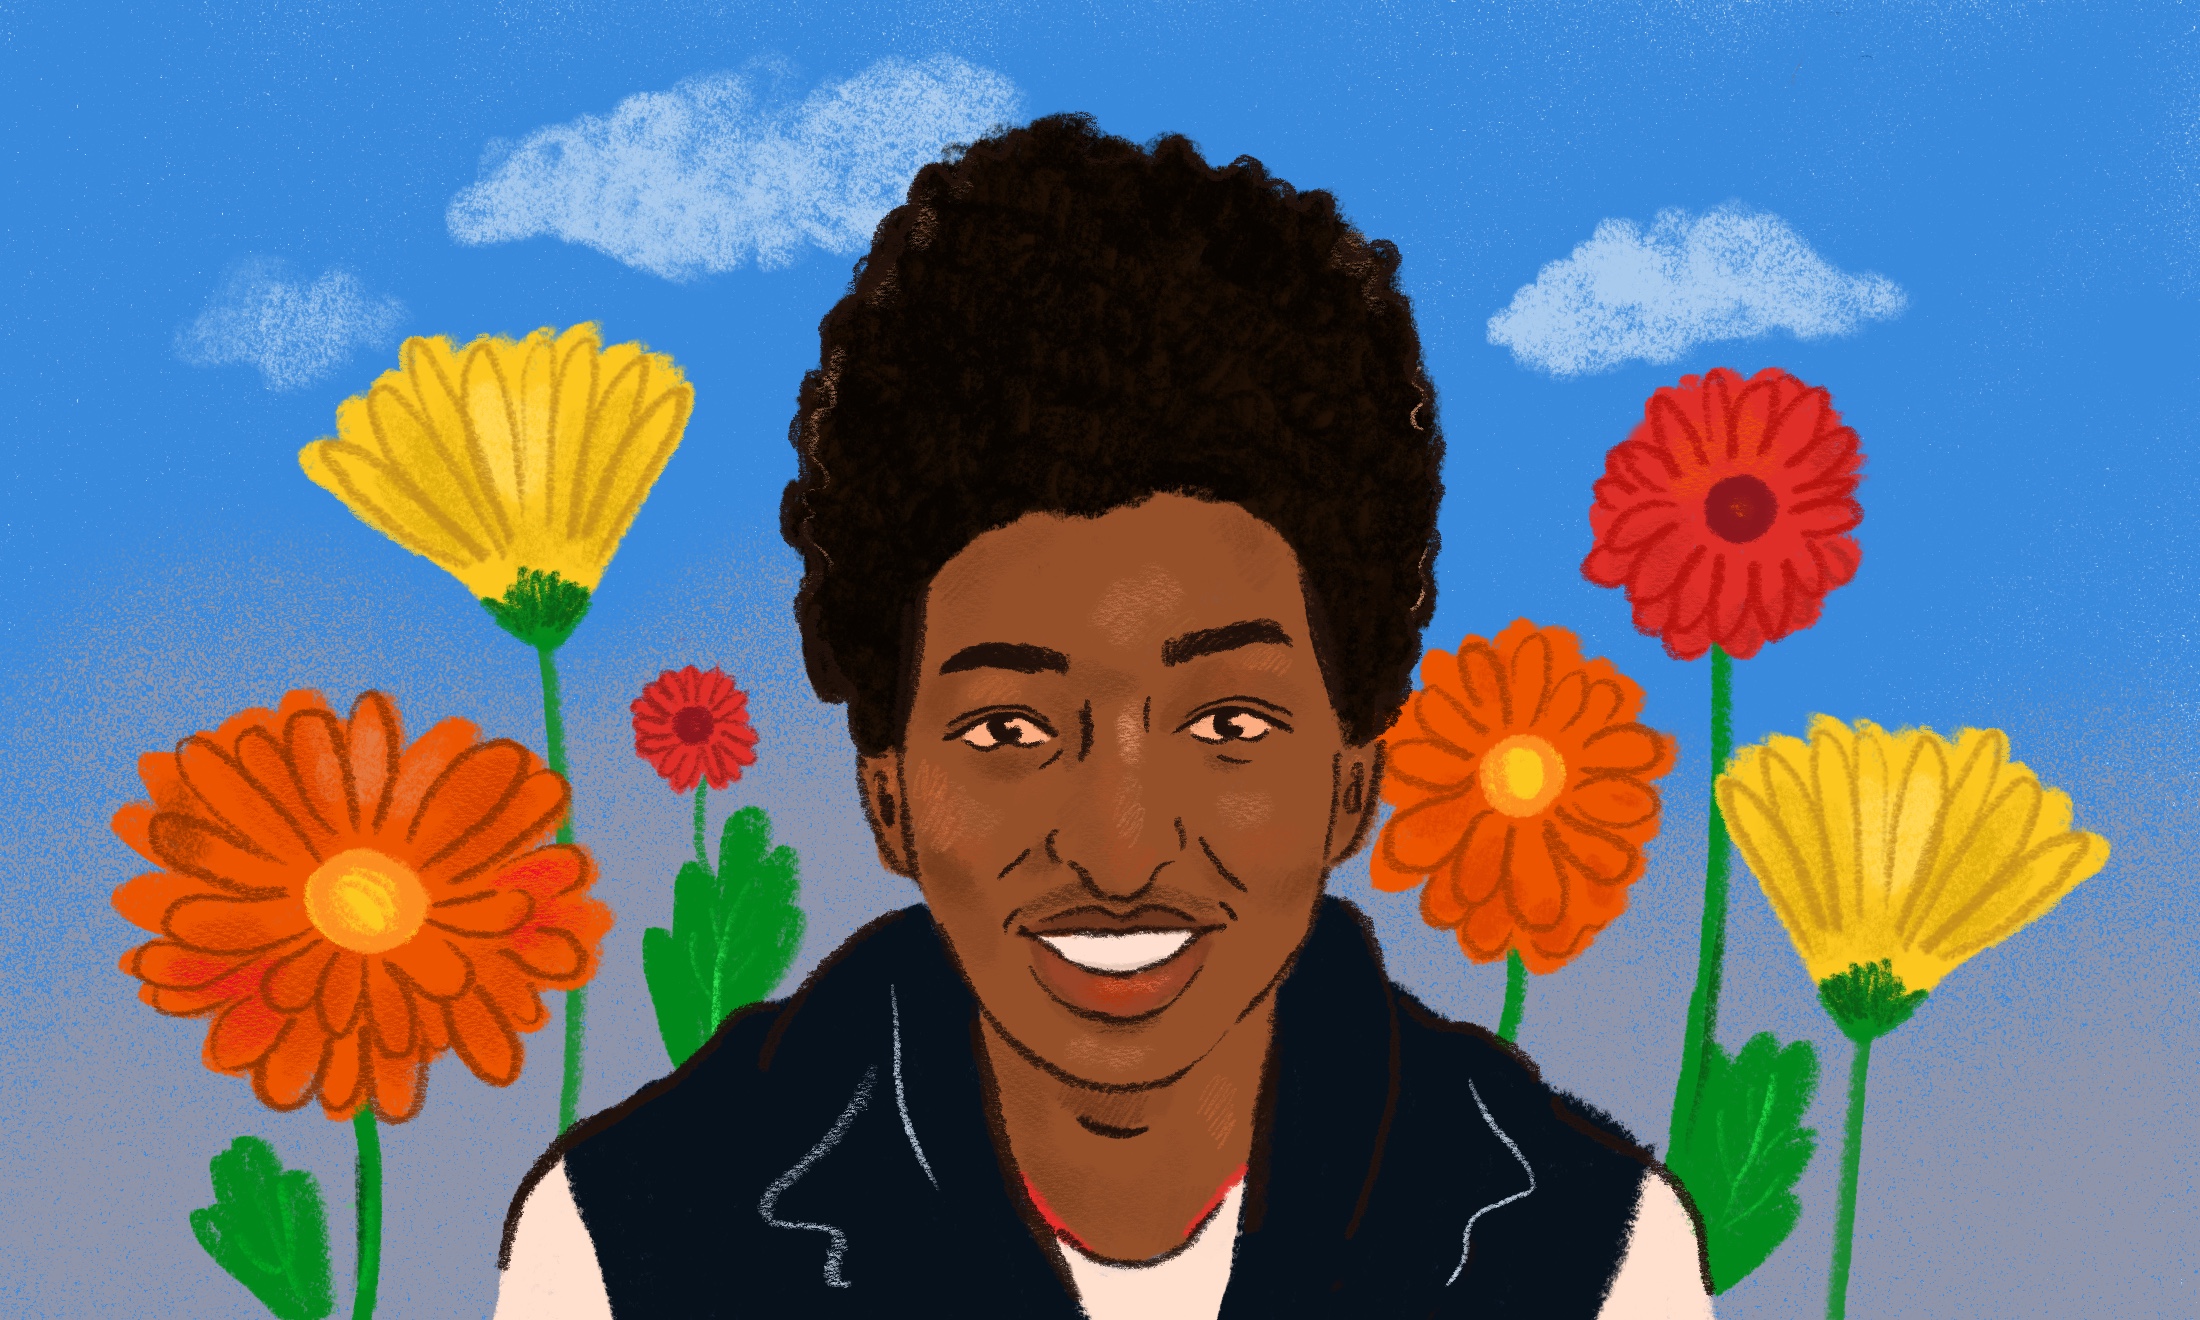 The story of Alexander Tekle: a young asylum seeker who died in Britain’s hostile environment